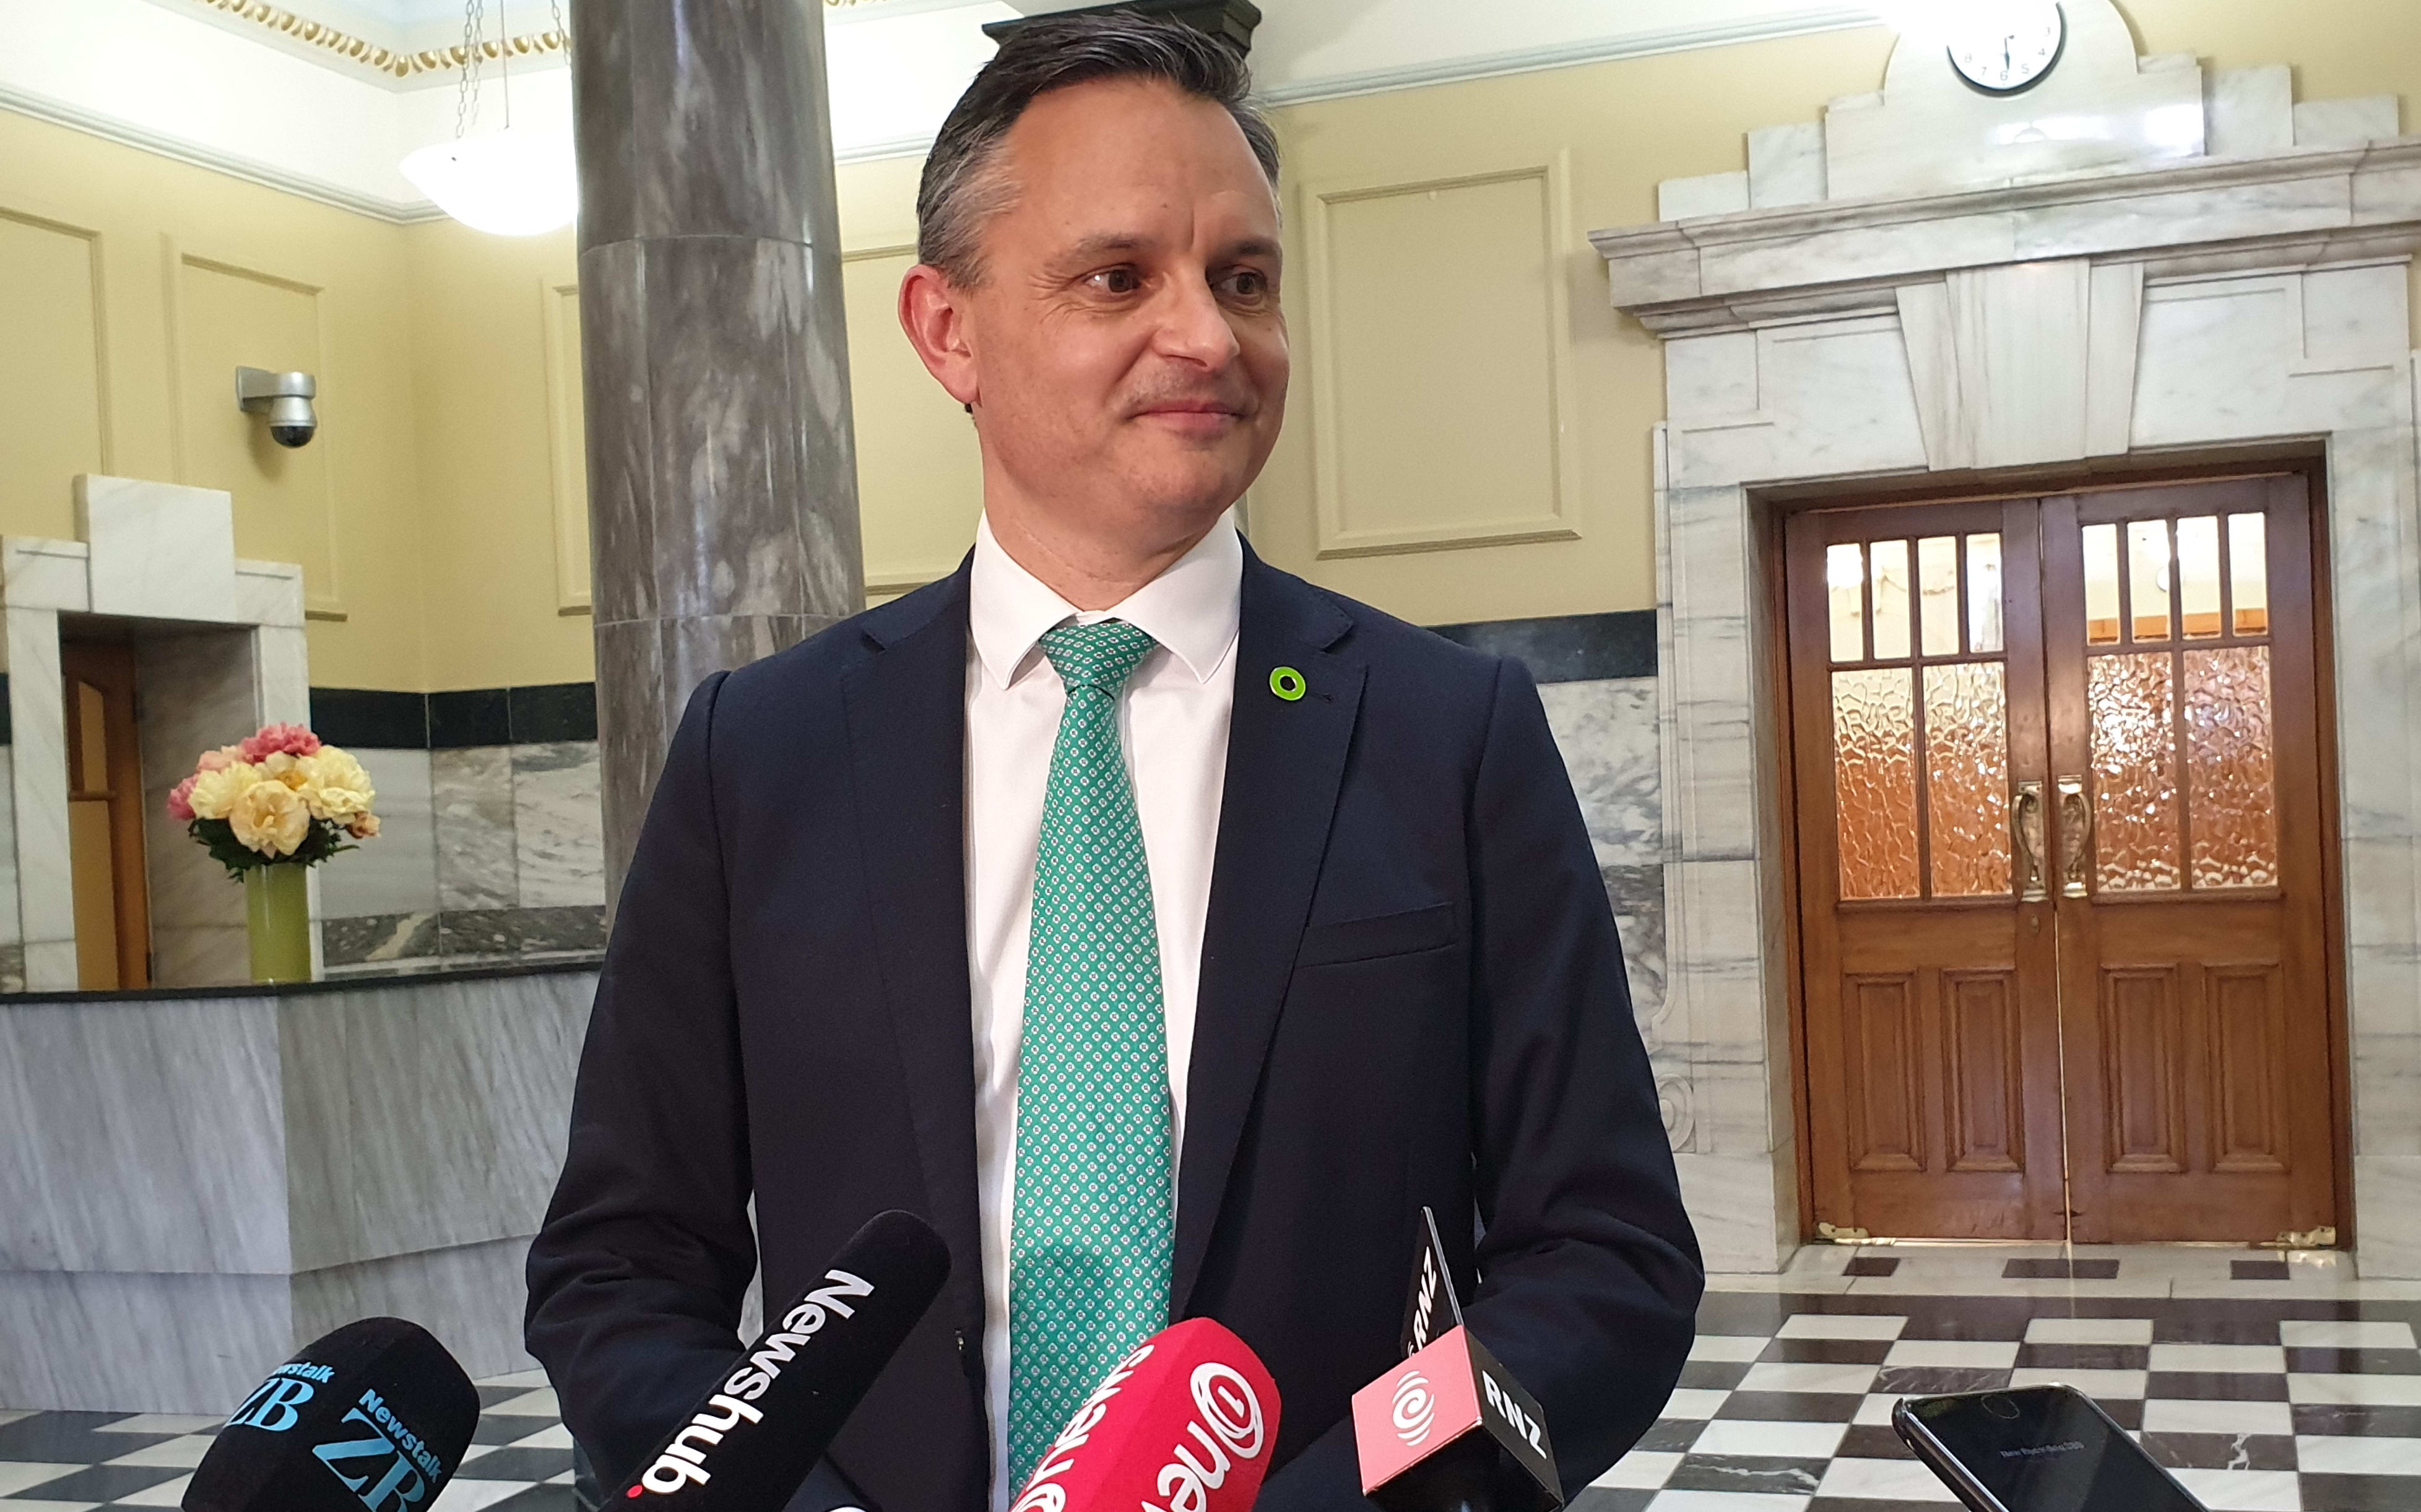 James Shaw after the Zero Carbon Bill passed its third reading on 7 November 2019.